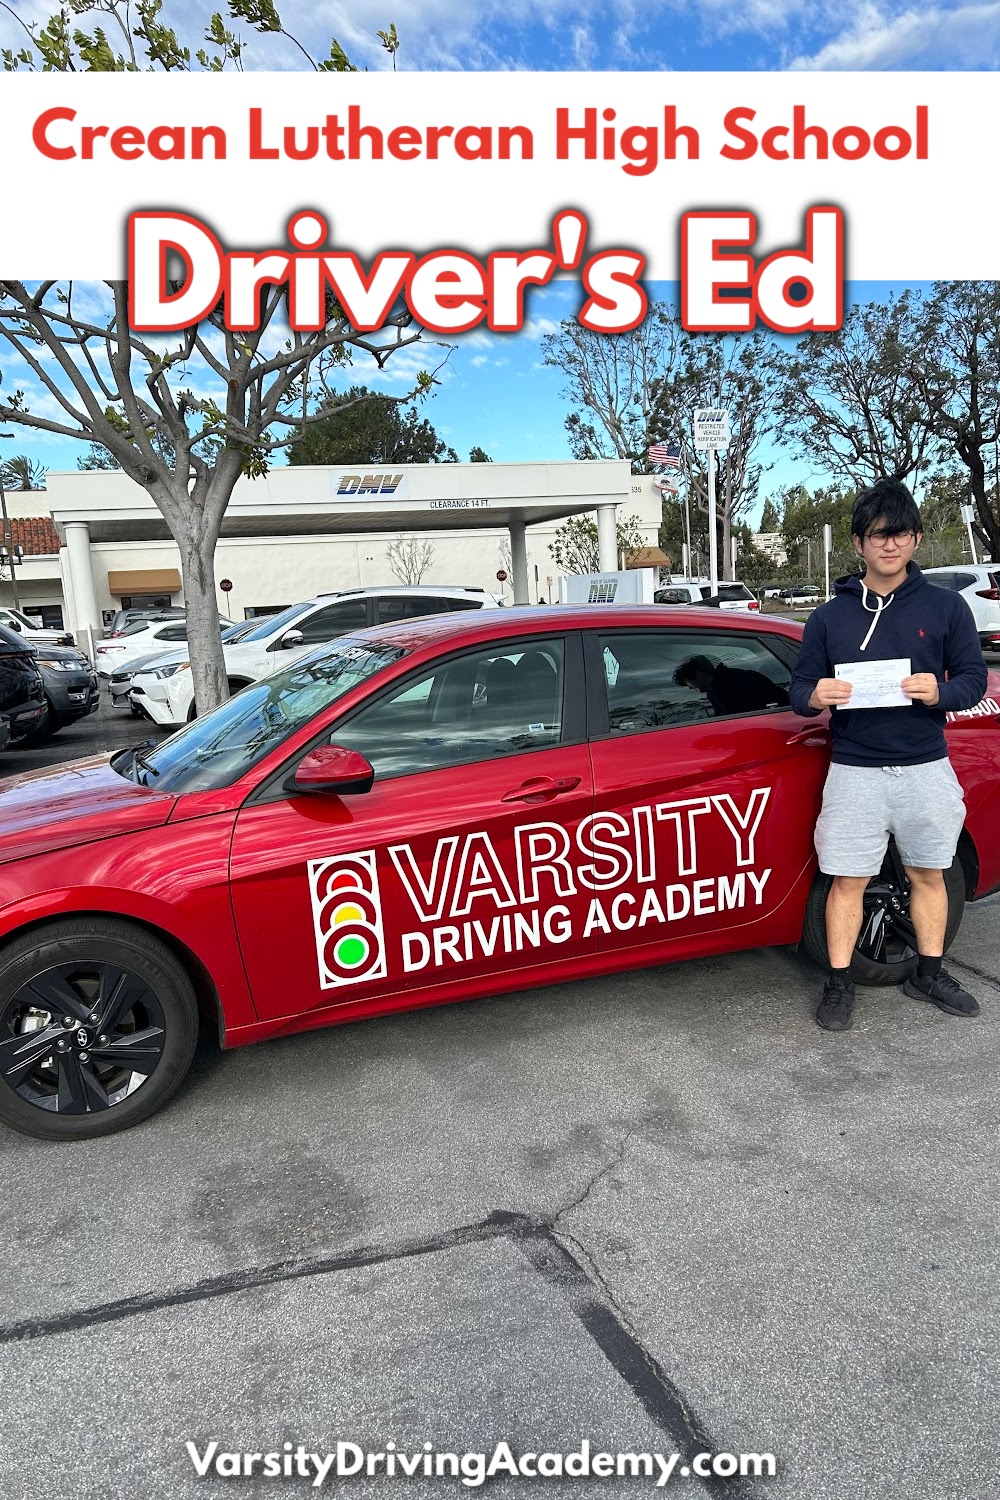 Welcome to Varsity Driving Academy, Crean Lutheran High School your #1 rated Driver's Ed for safety and success rate amongst students.